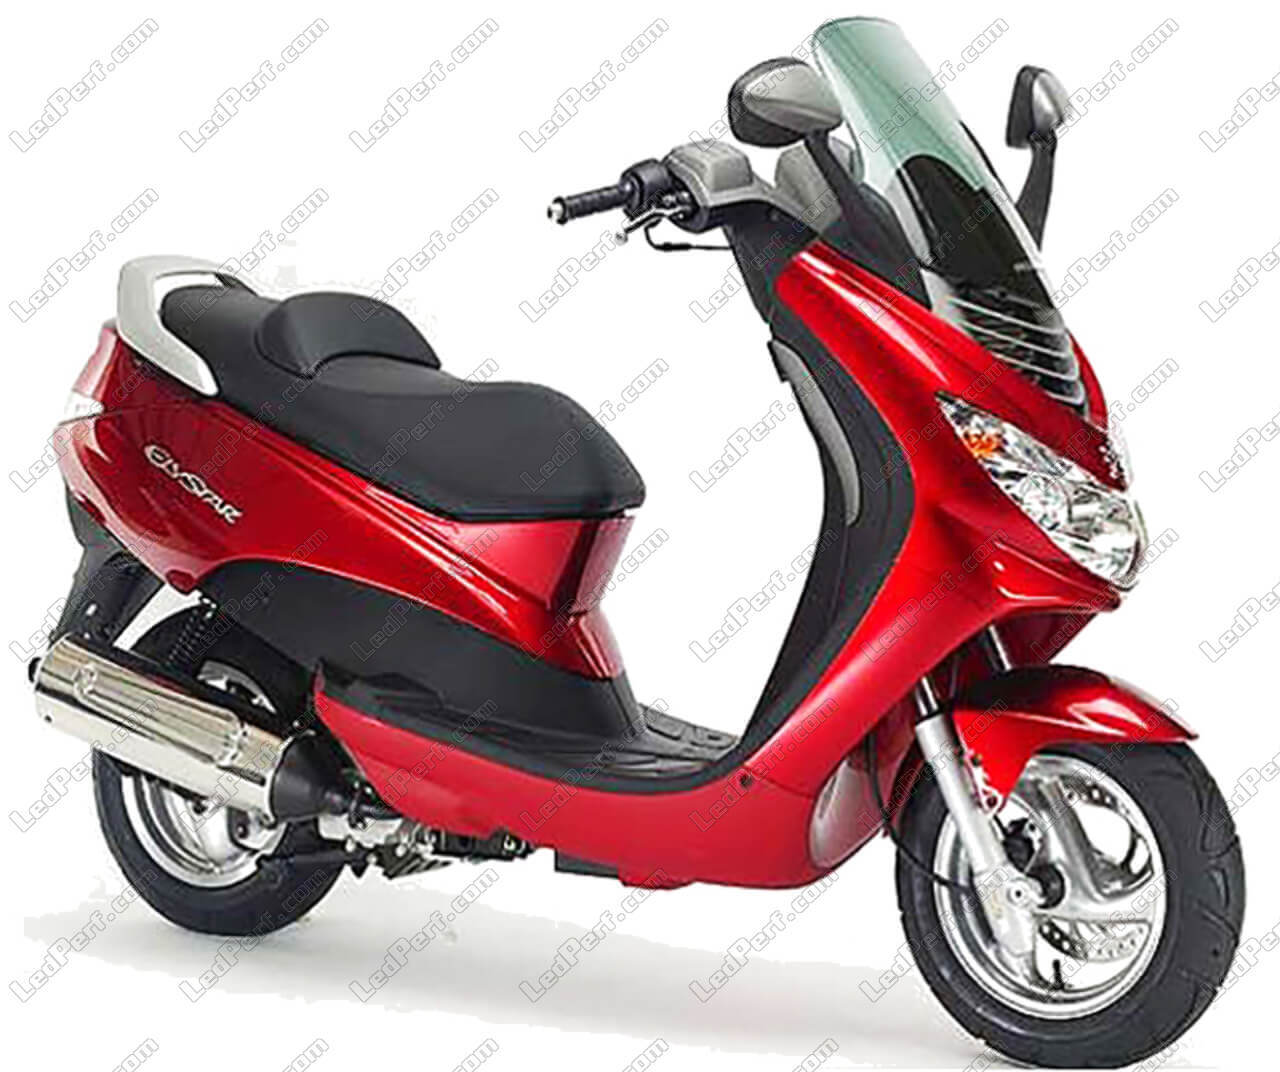 energi kighul by Additional LED headlights for scooter Peugeot Elystar 125